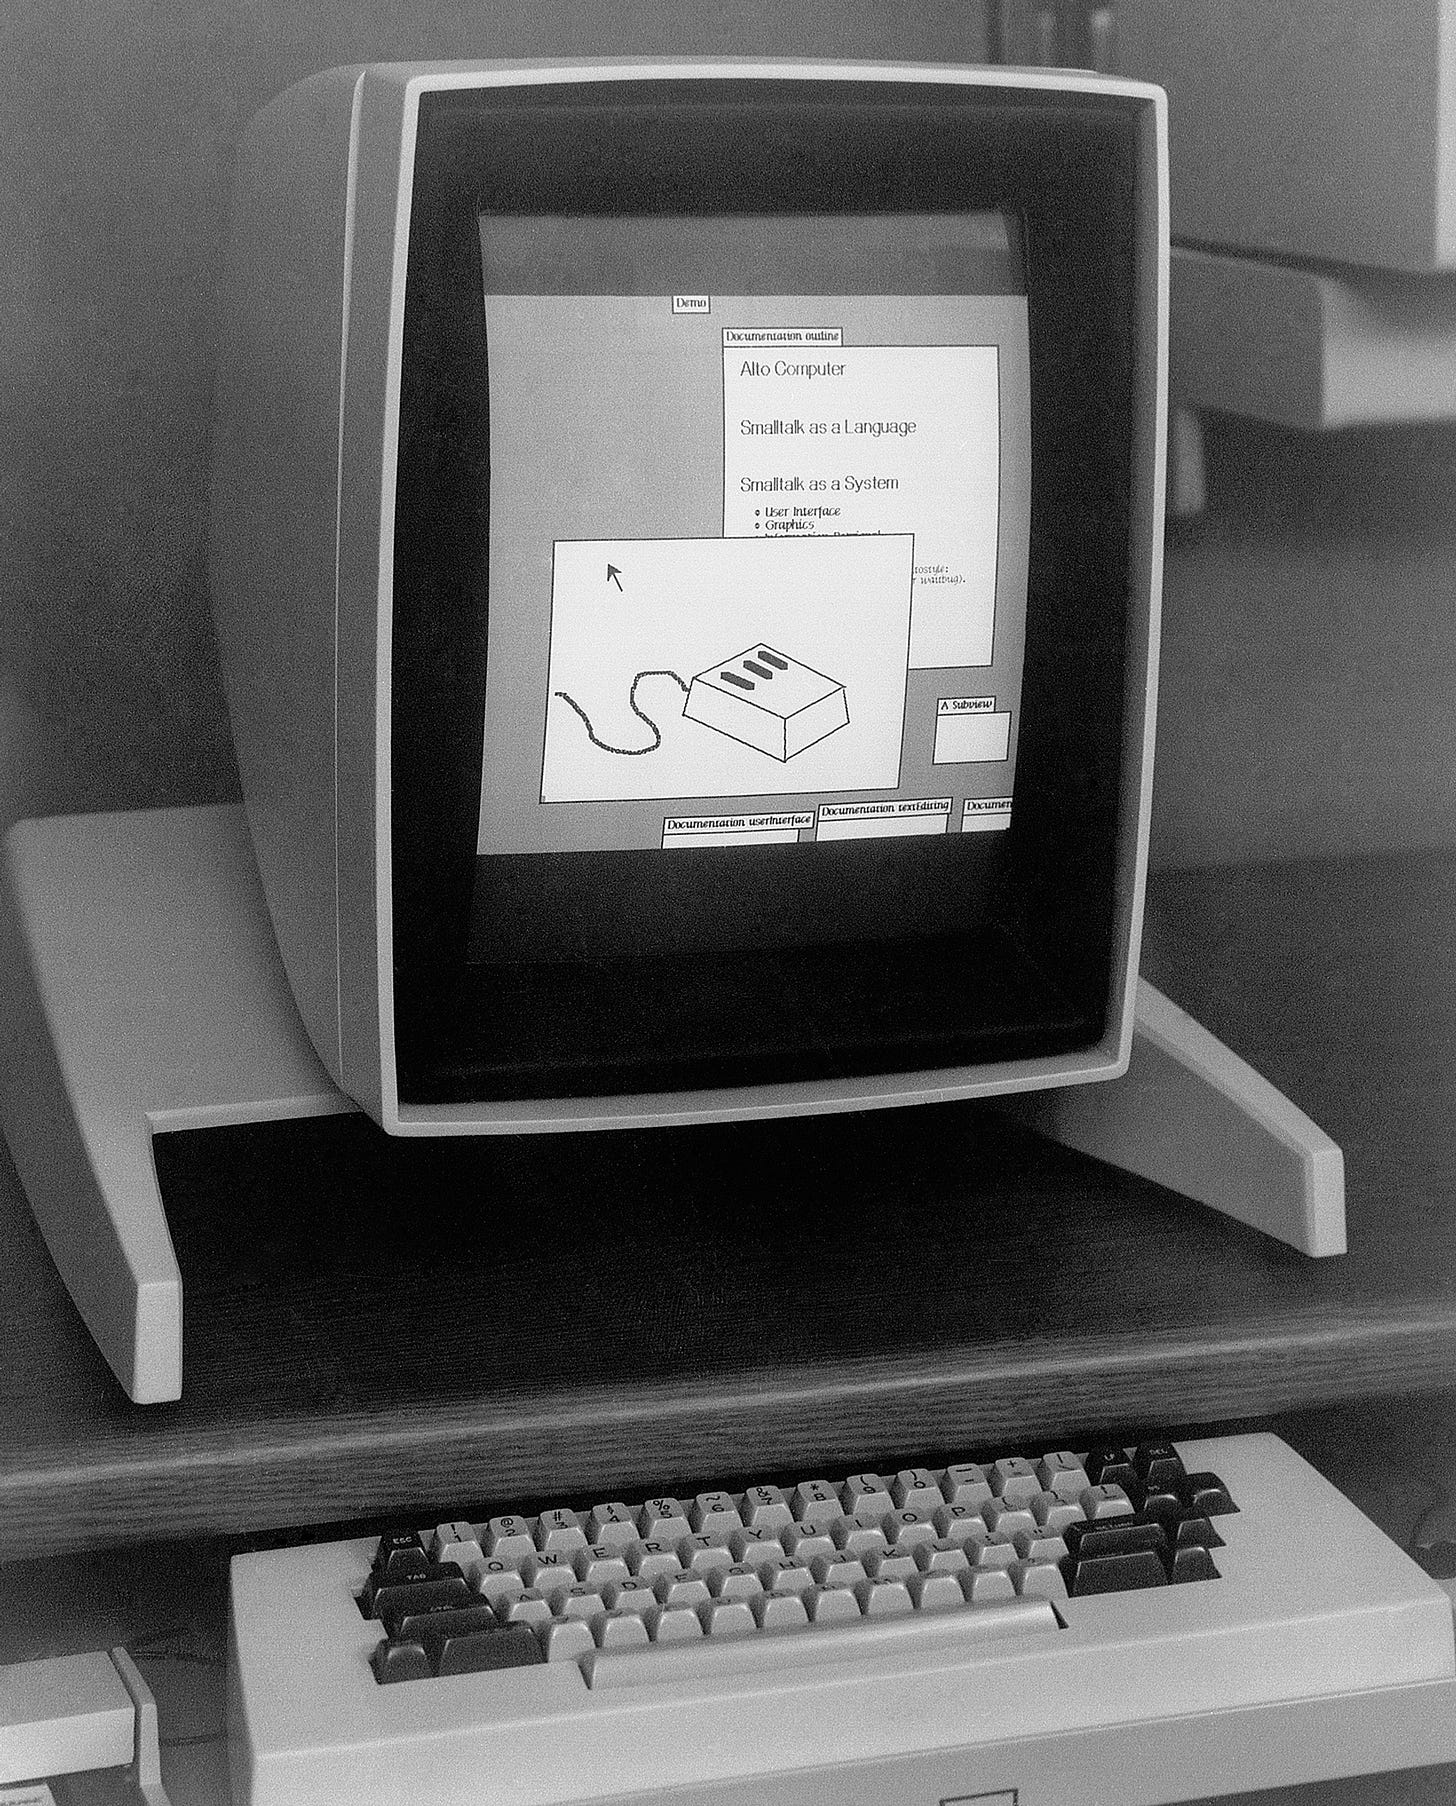 A black-and-white vertical display on a desk above a keyboard and mouse